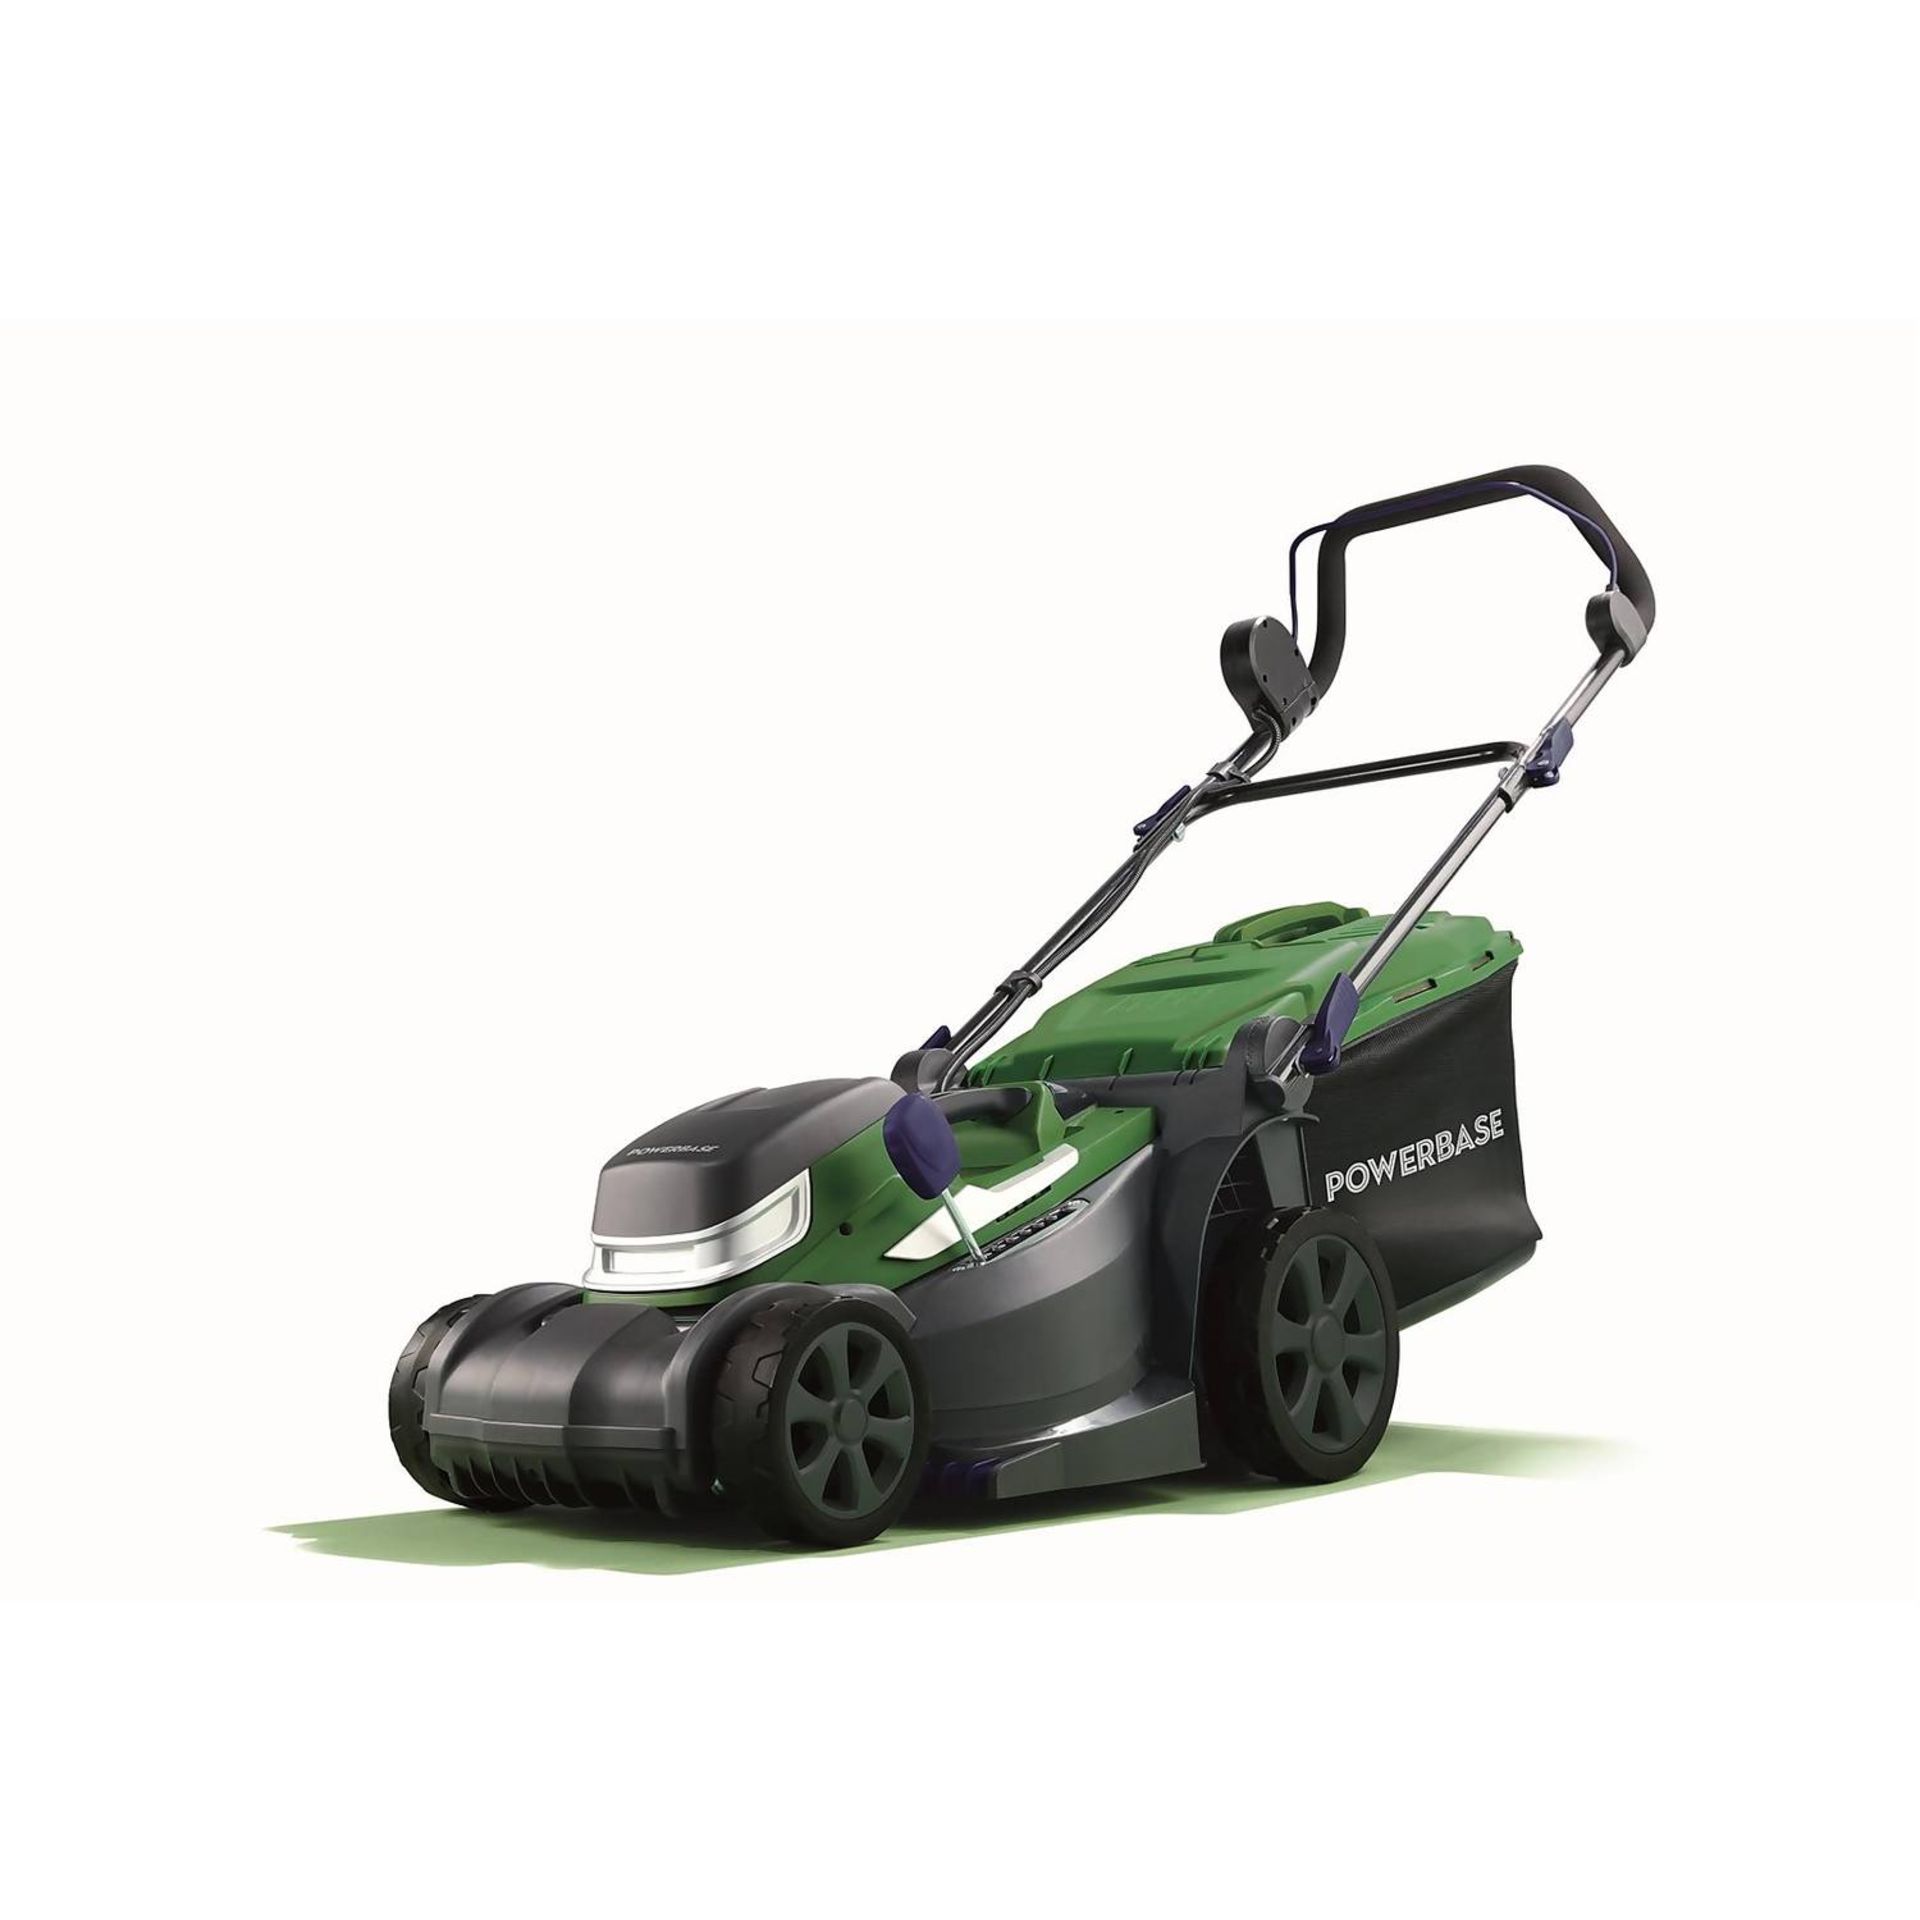 (R1G) 1x Powerbase 34cm 40V Self Propelled Cordless Lawn Mower. (With Battery & Charger). RRP £169.